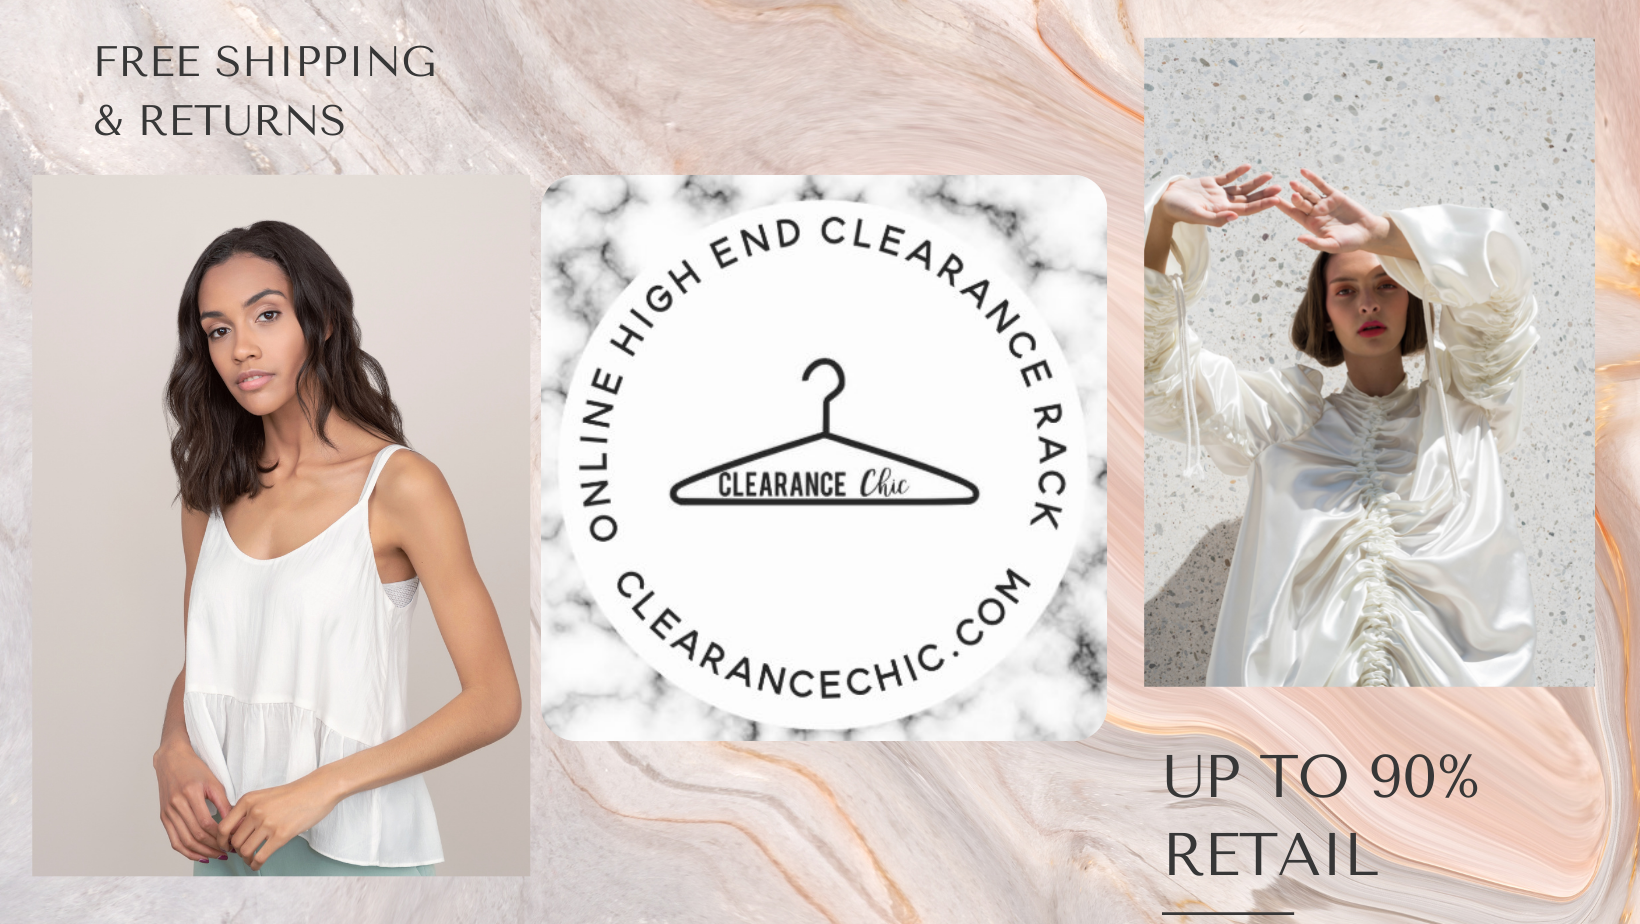 Clearance Chic Online High End Clothing Clearance Rack – CLEARANCE